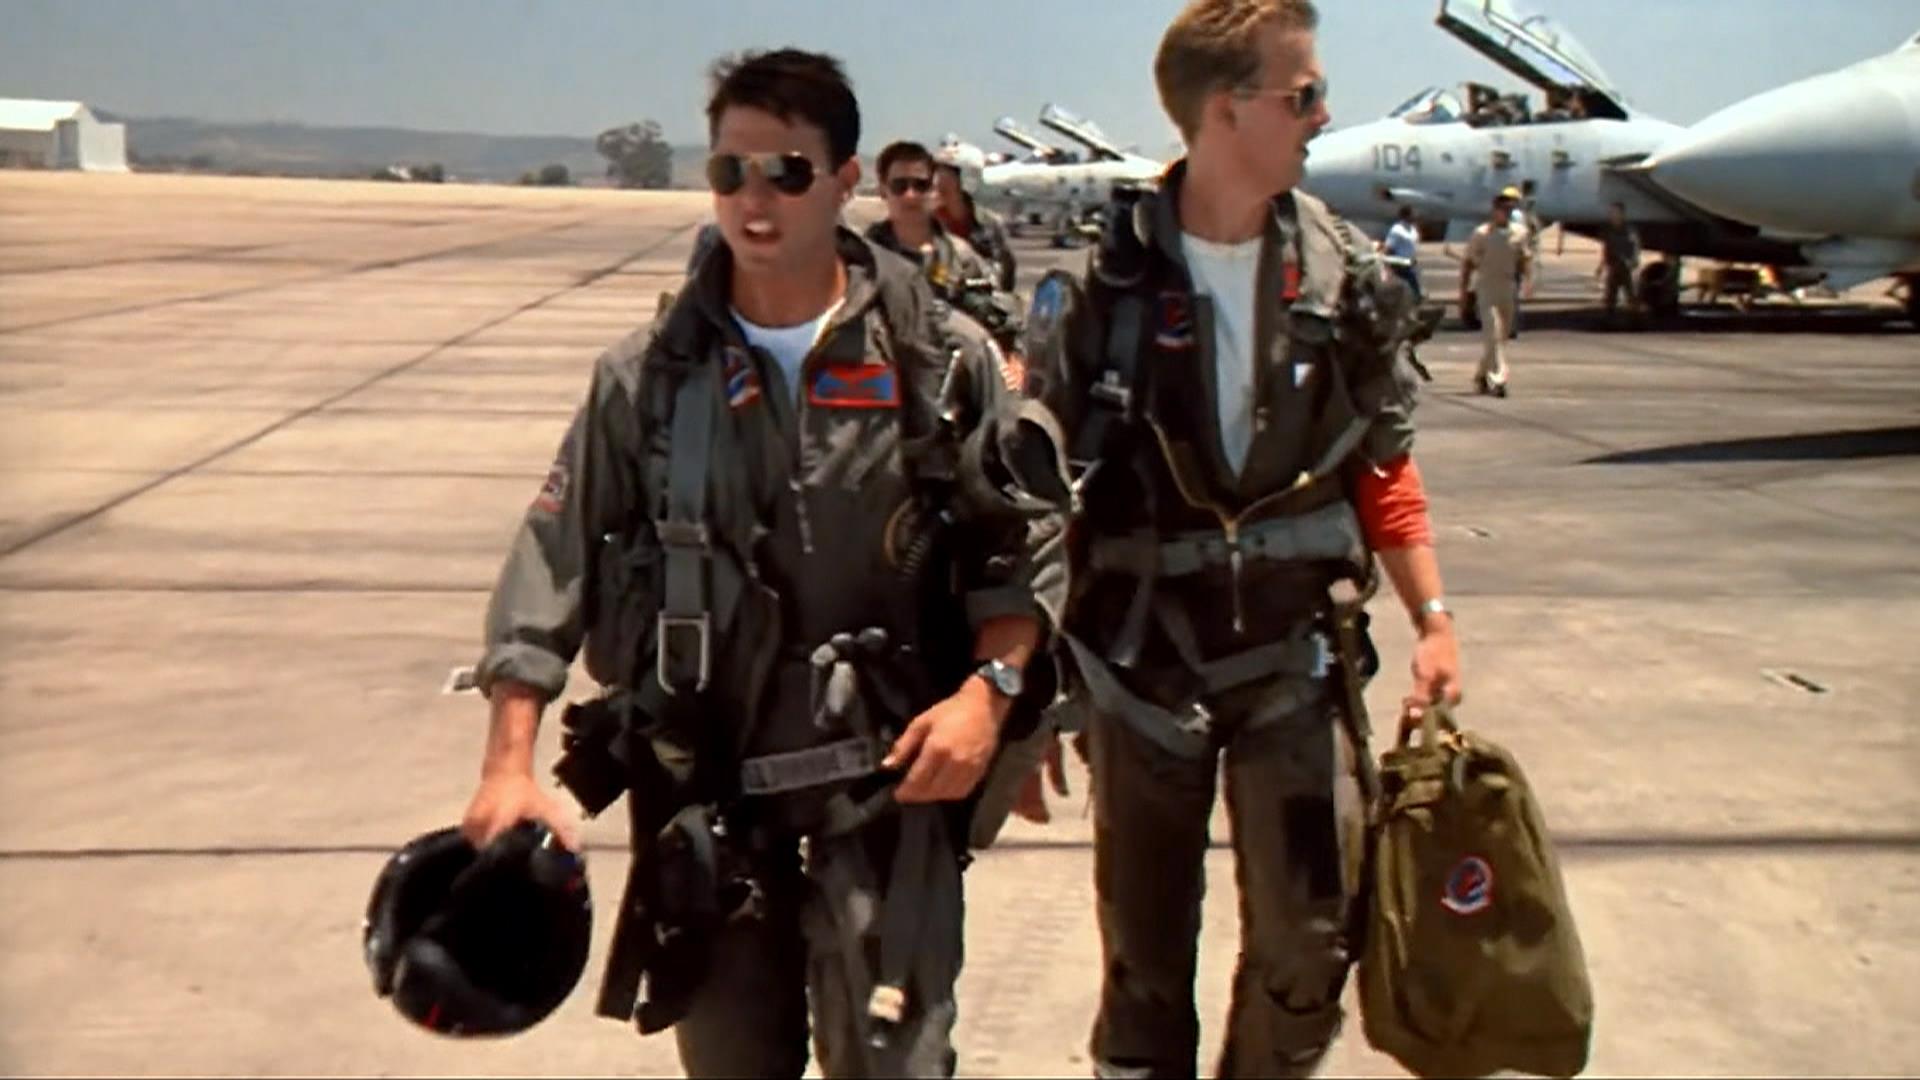 The 'Top Gun' sequel will be called